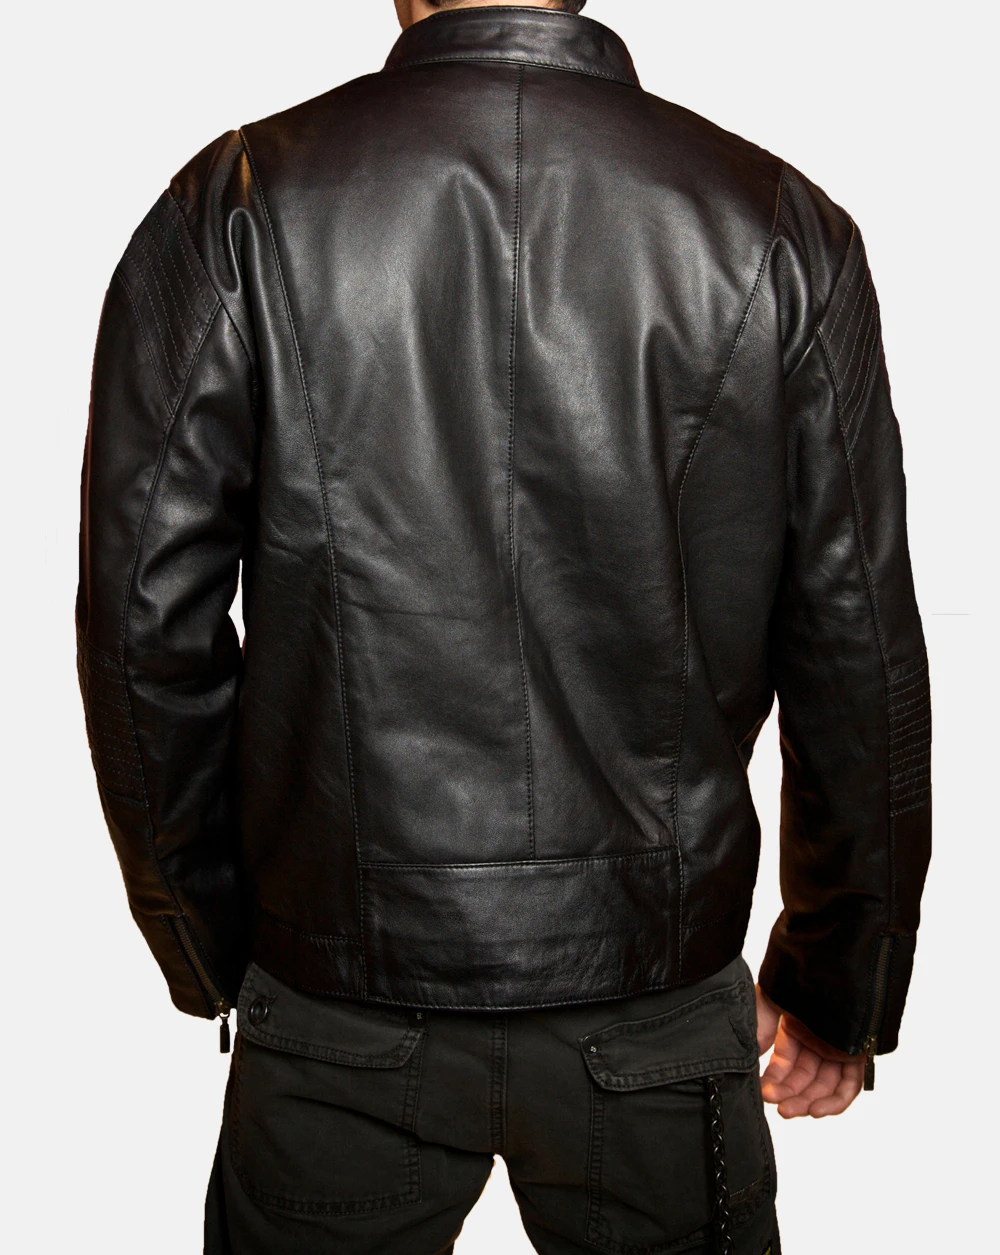 Casual mens leather Jacket with substantial pockets